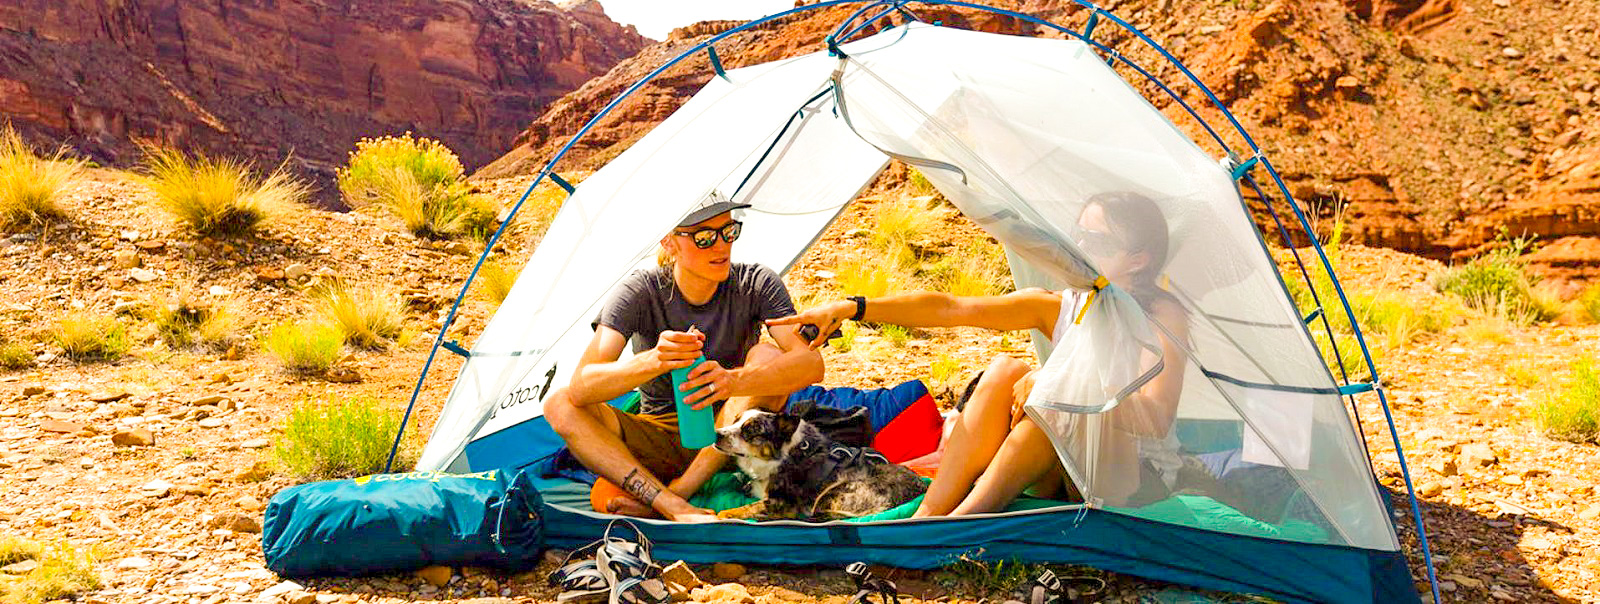 Inti 2 is a lightweight universal alcove tent